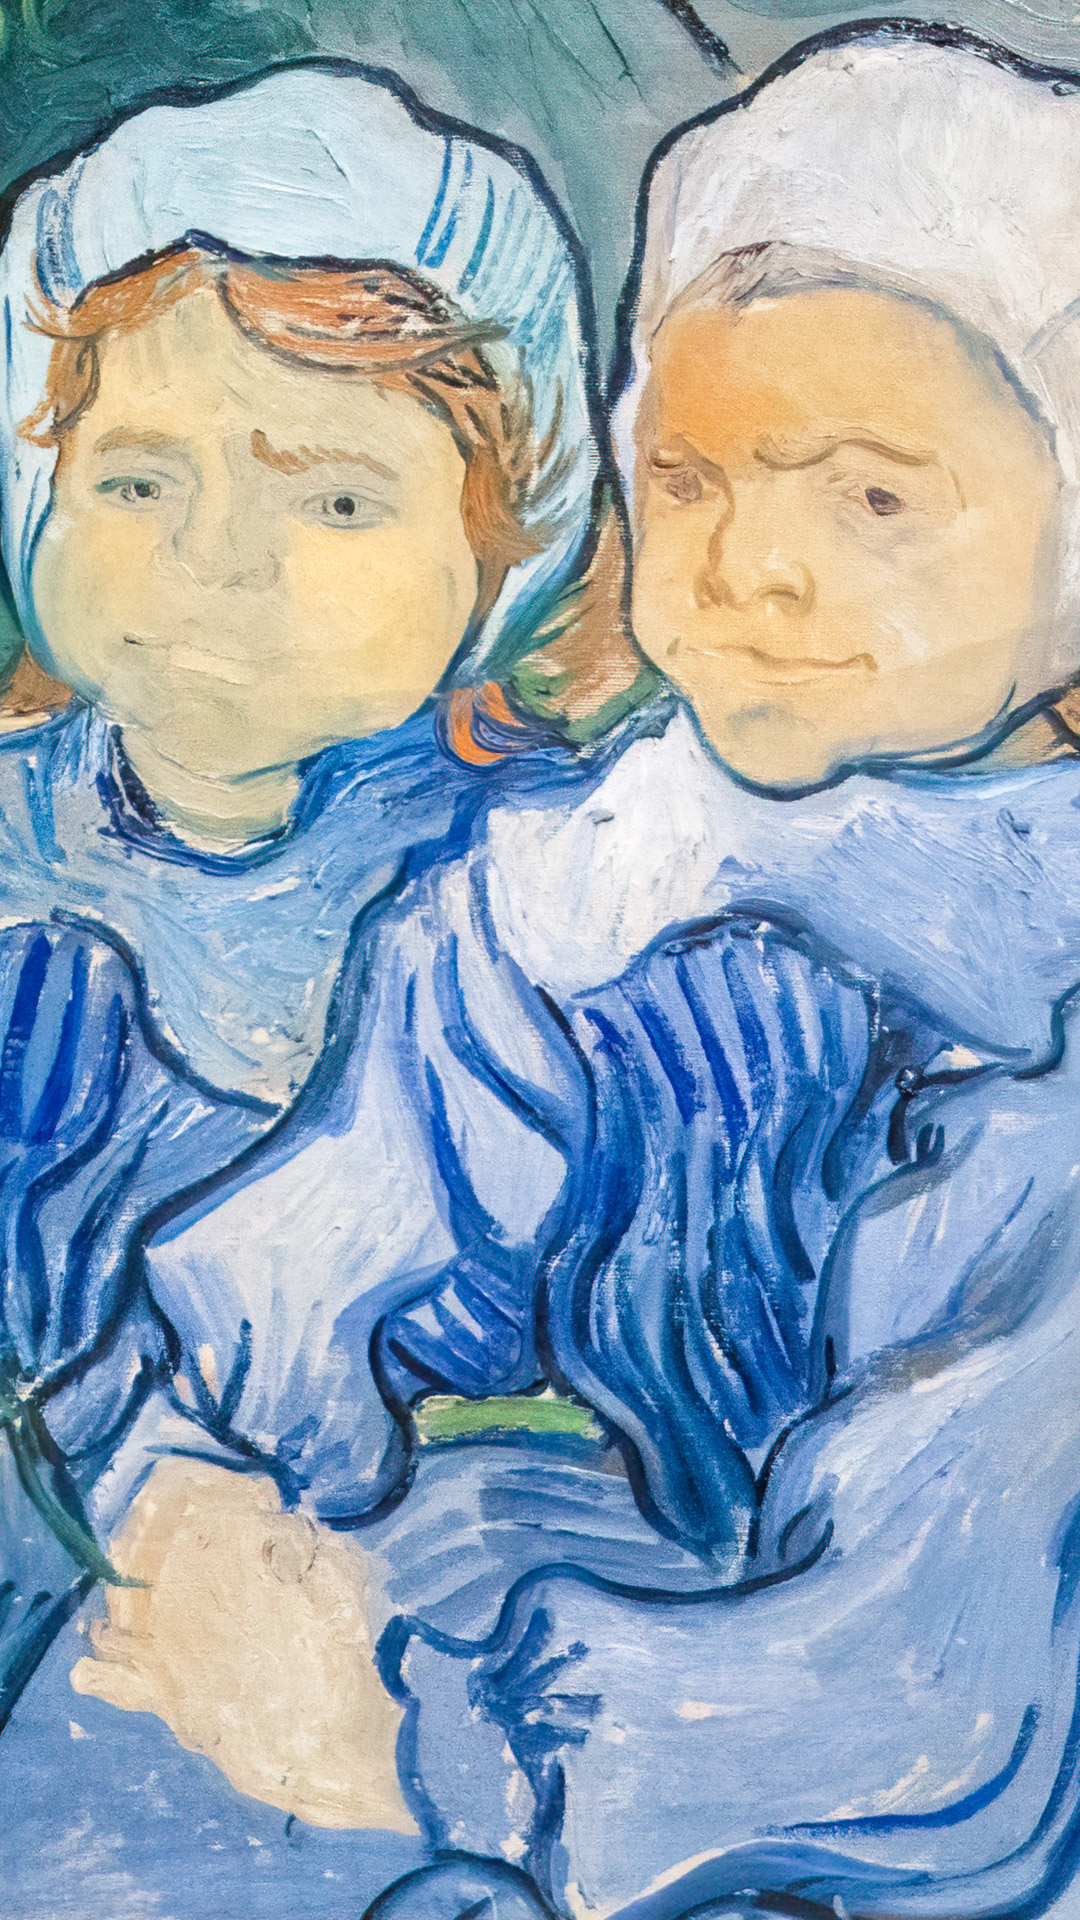 Two Children lockscreen for iPhone adds a touch of innocence and charm to your device, a free download capturing Van Gogh's tender portrayal.